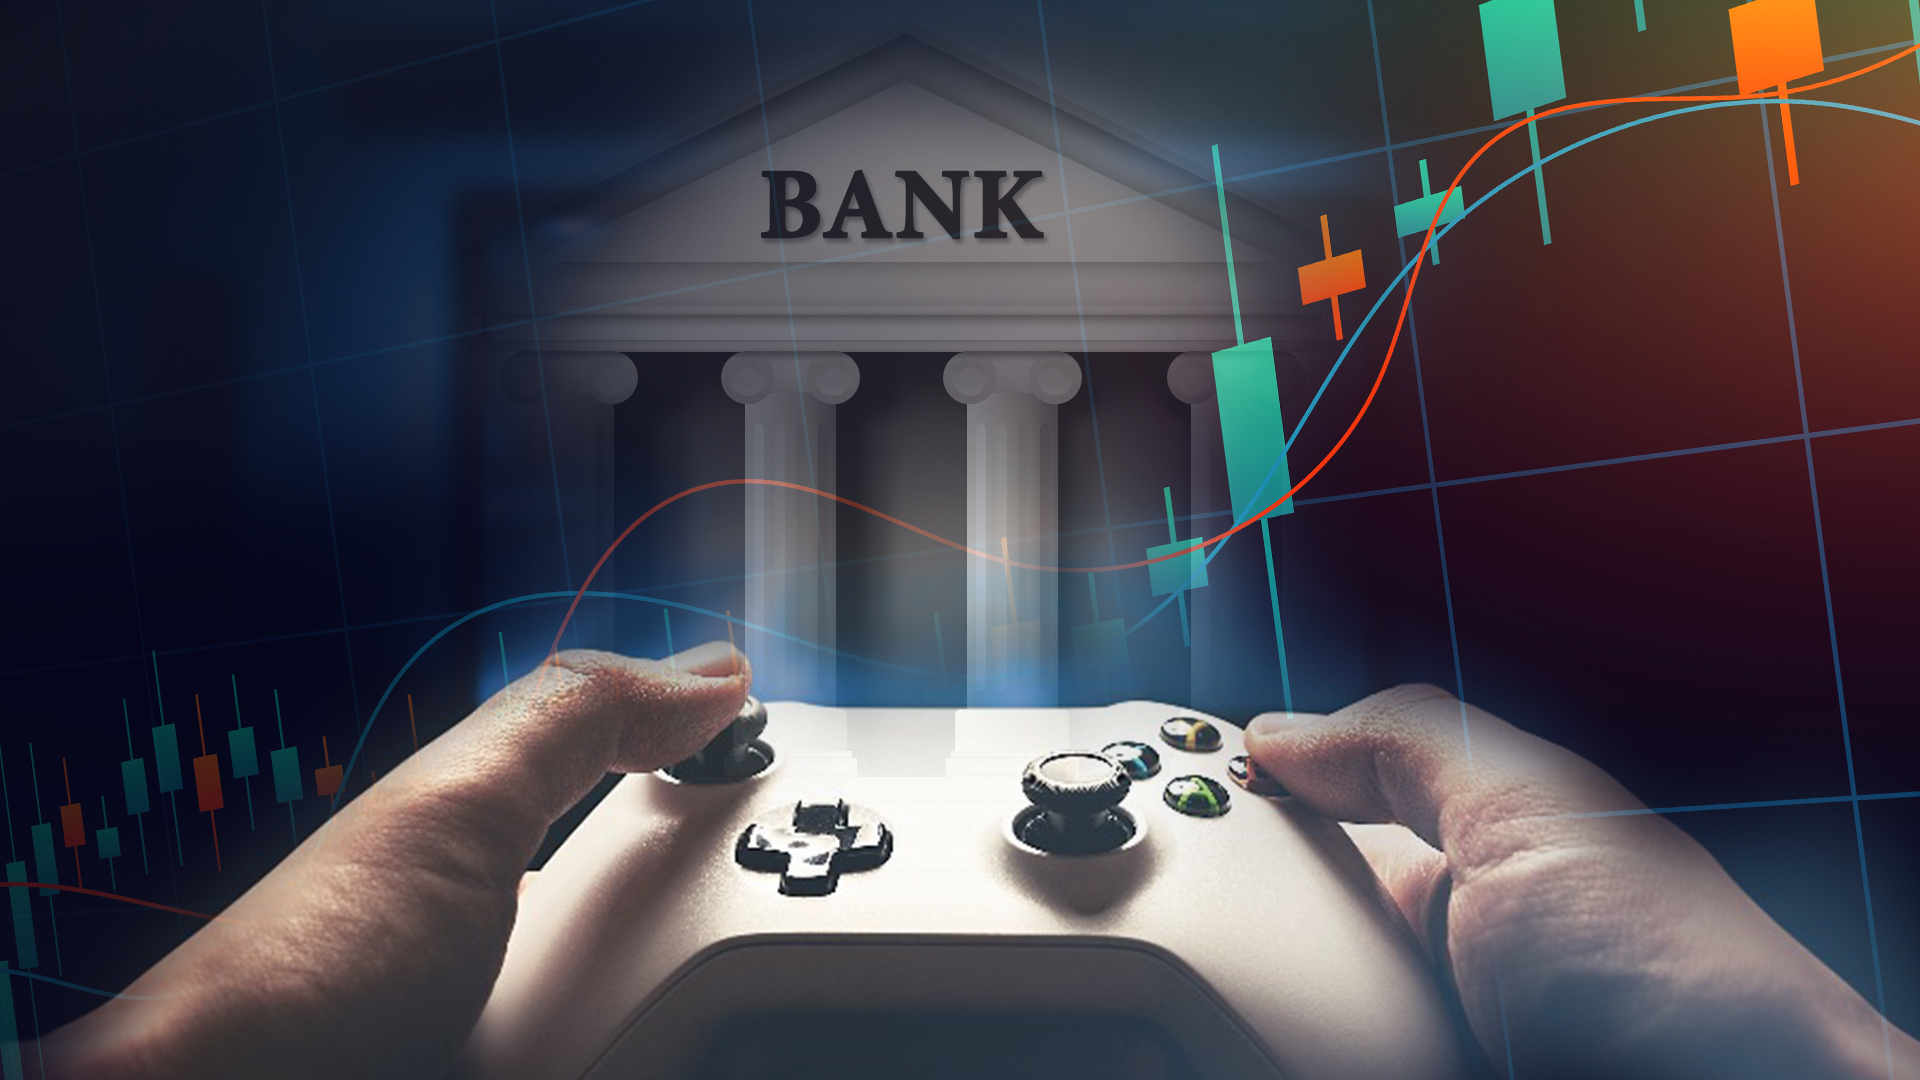 Gamification: How Video Games Are Reshaping Banking And Other Financial Services